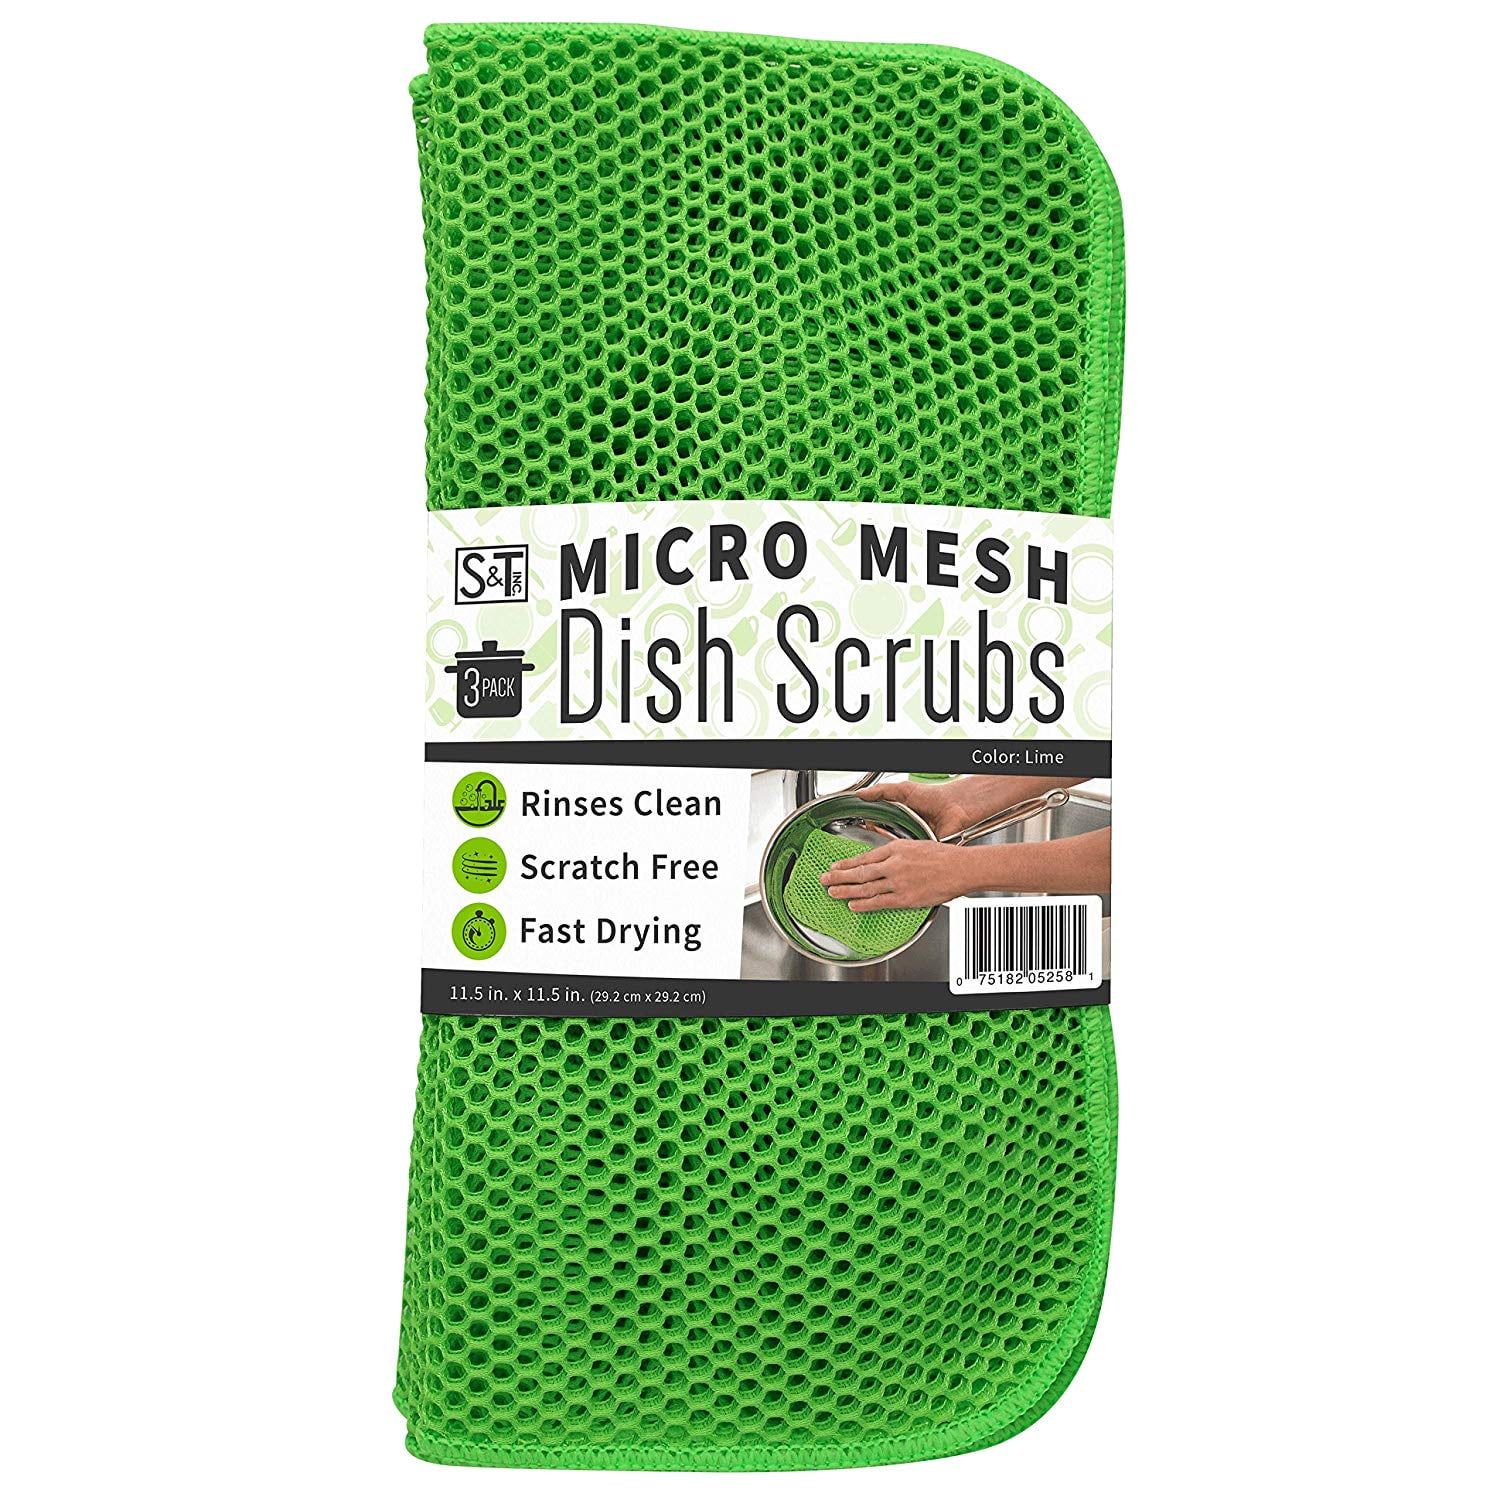 S&T INC. Mesh Dish Scrubber, Kitchen Dish Cloths for Washing Dishes, Grey,  11.5 Inches x 11.5 Inches, 3 Pack